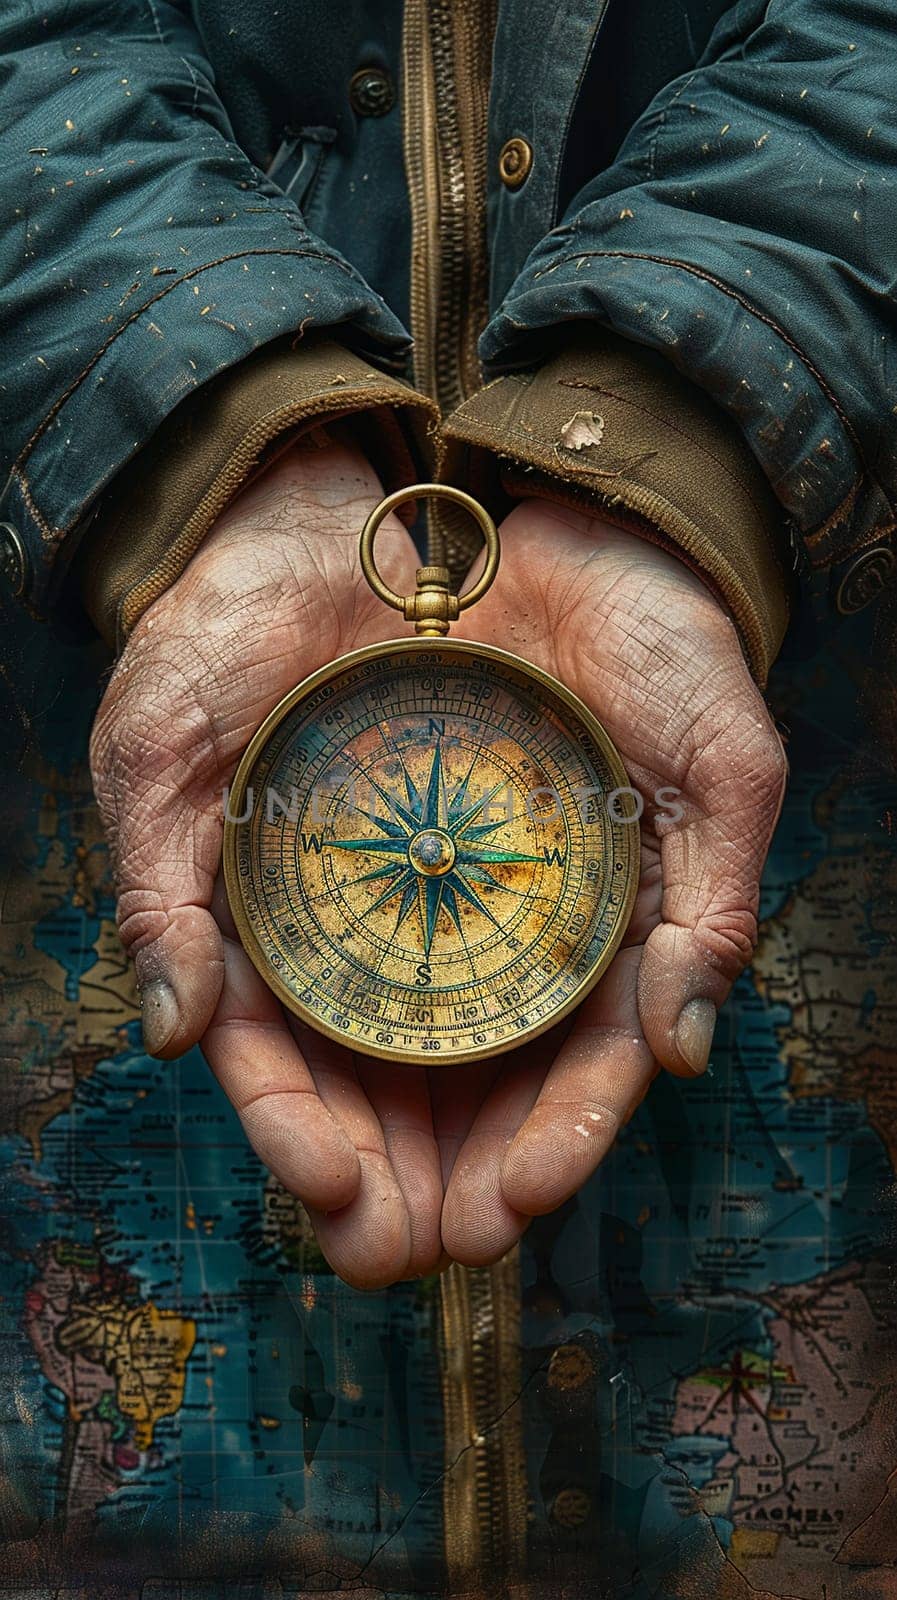 Hands holding a compass that points to adventure, rendered with a vintage explorer's map aesthetic.